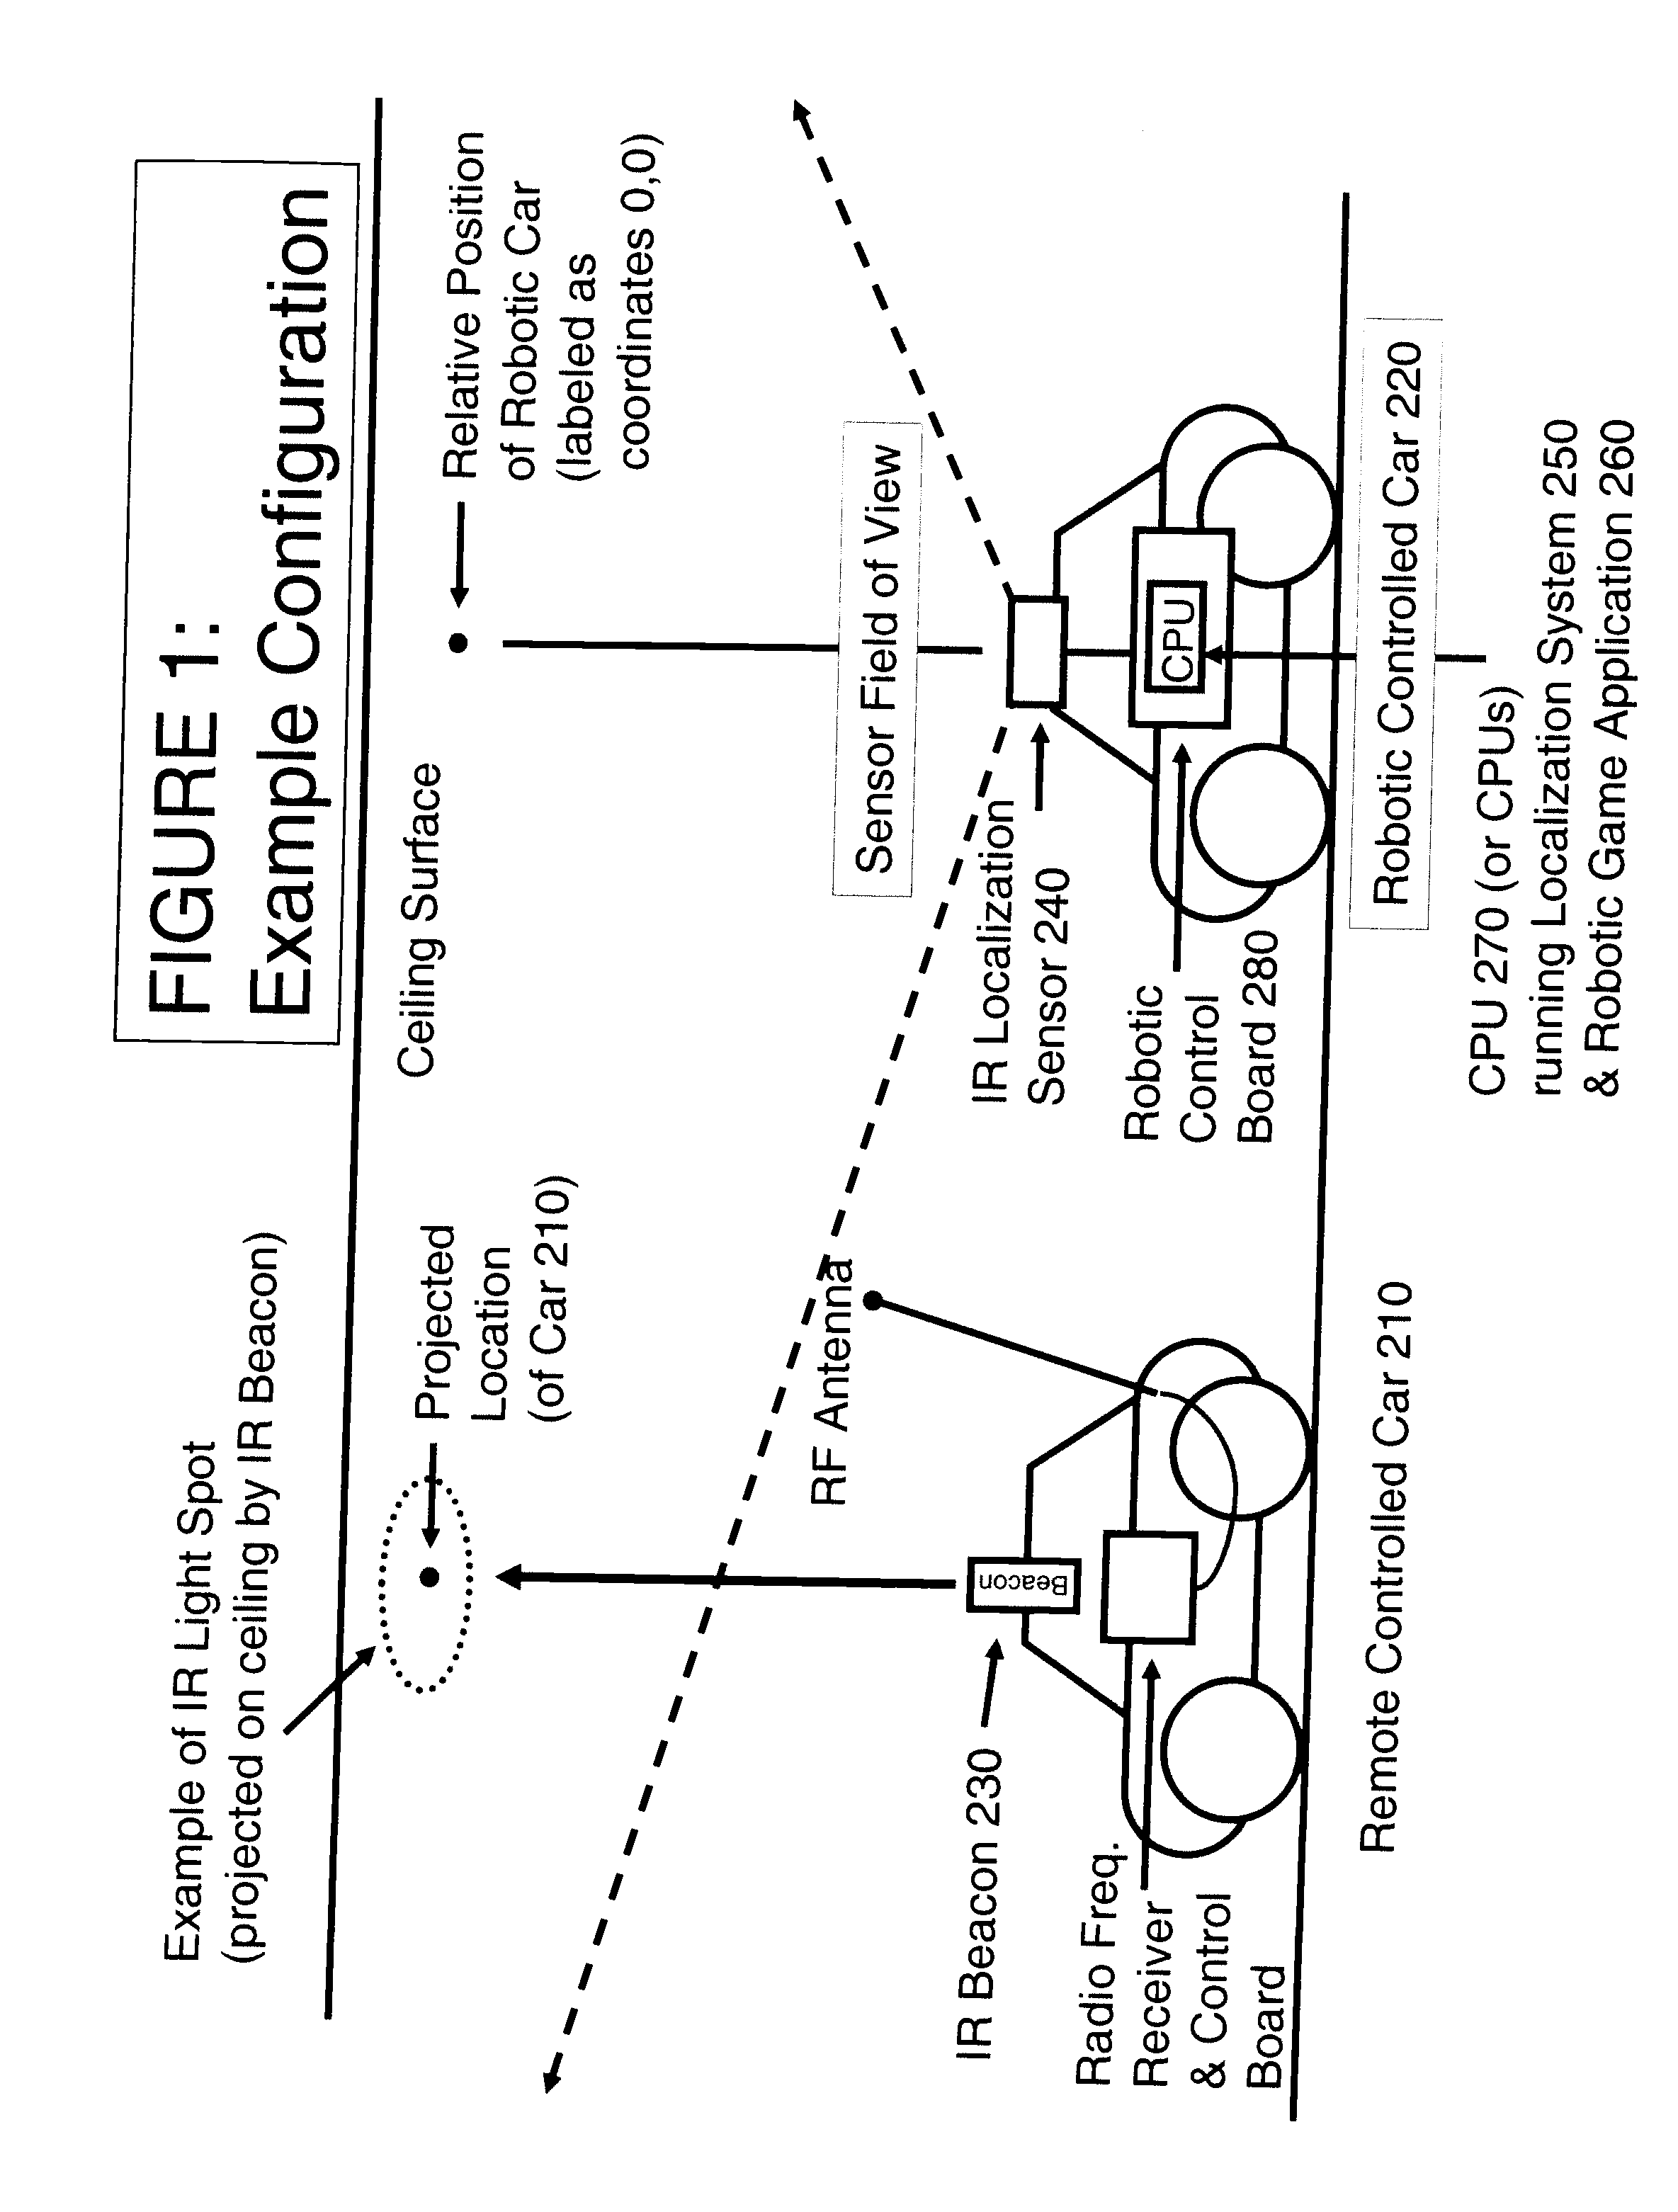 Robotic game systems and methods